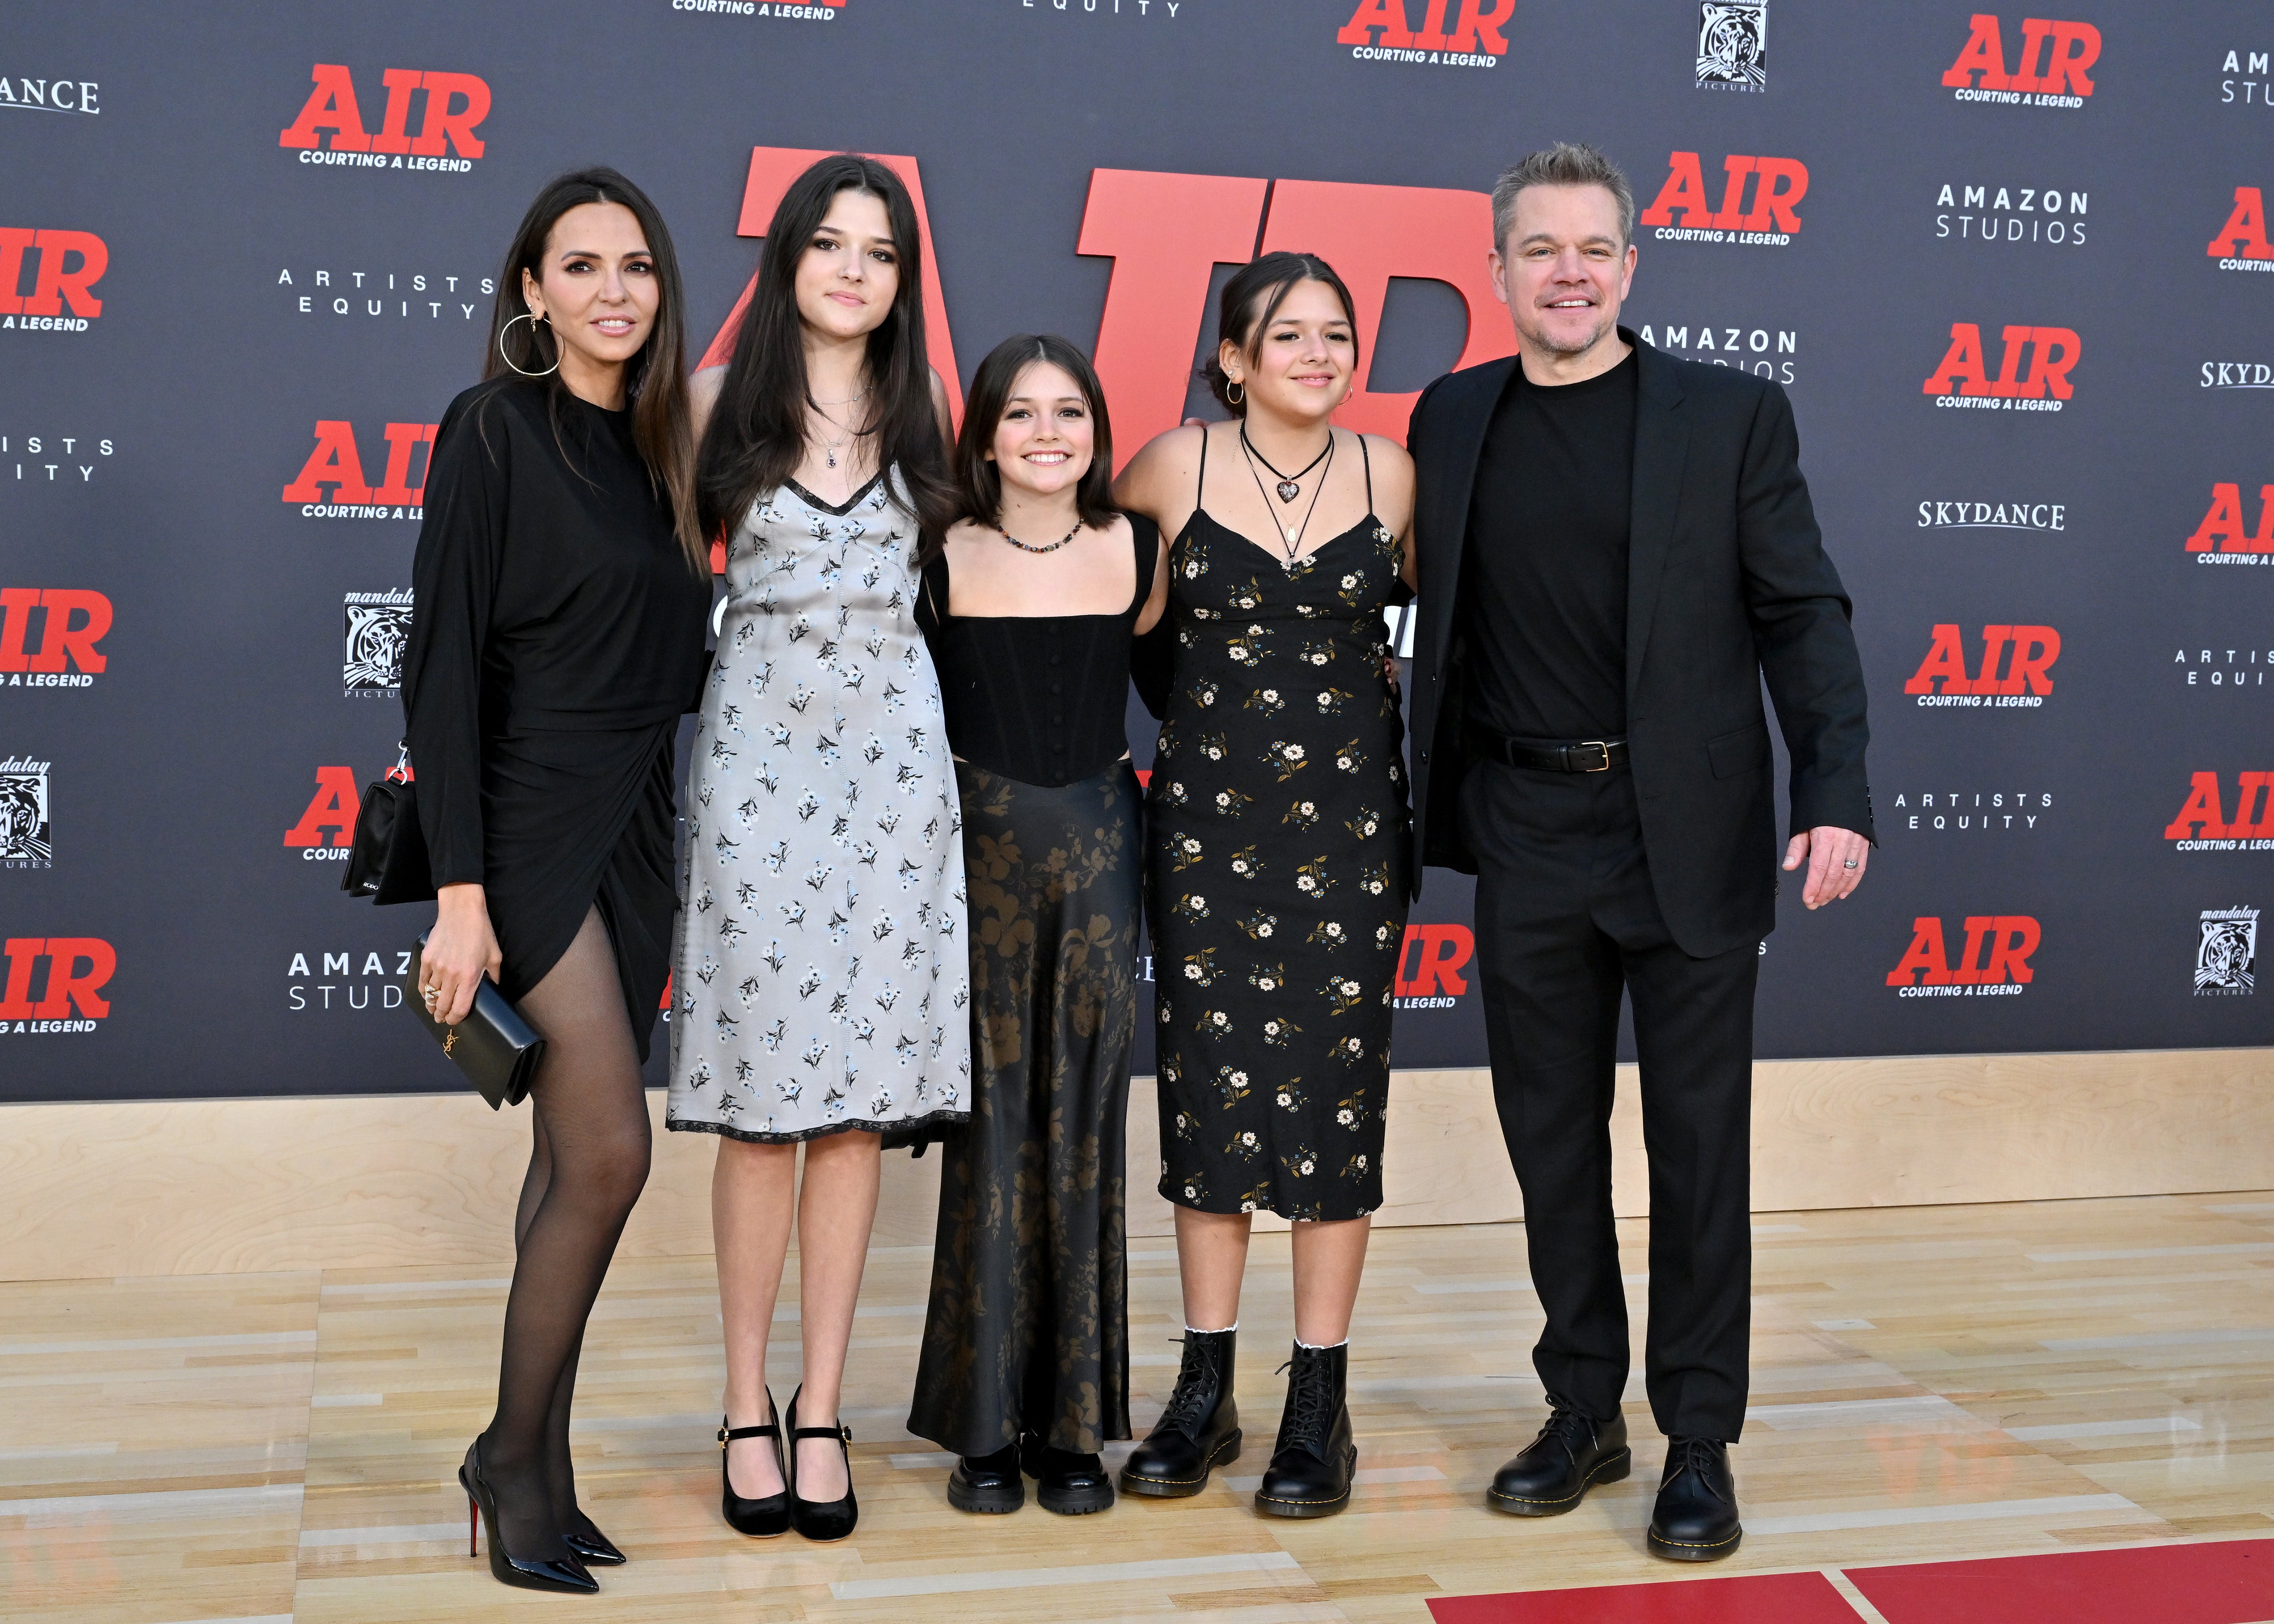 Luciana Barroso, Matt Damon, and three of their daughters pose in coordinating black ensembles on the carpet